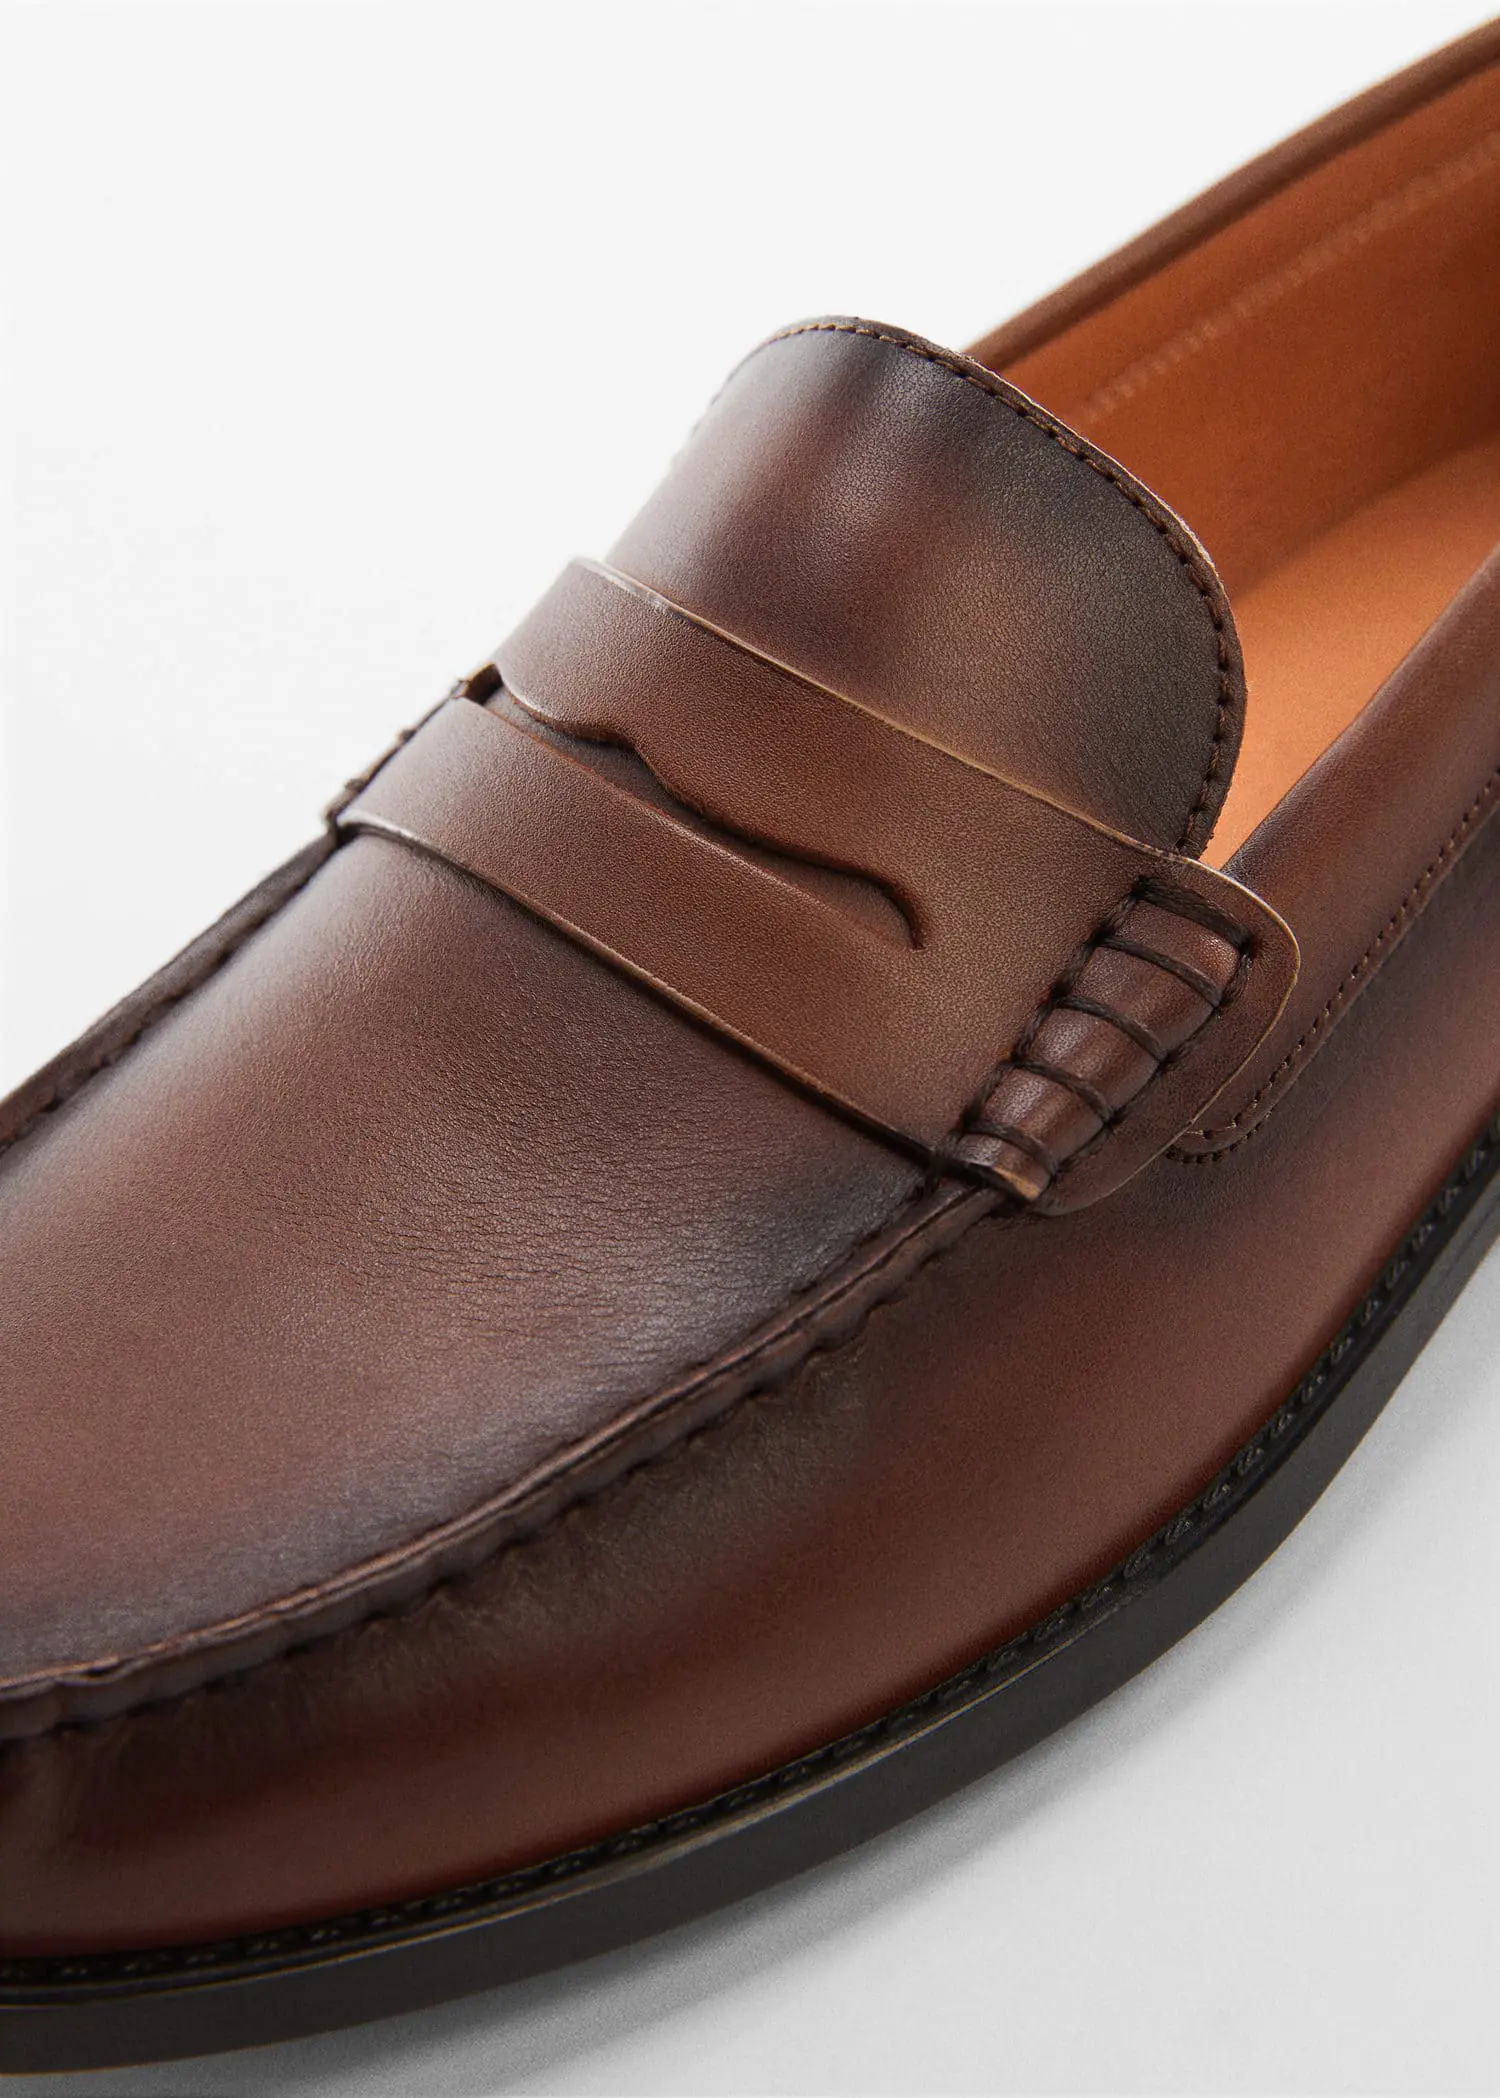 Mango Leather penny loafers. a close-up view of a brown loafer shoe. 